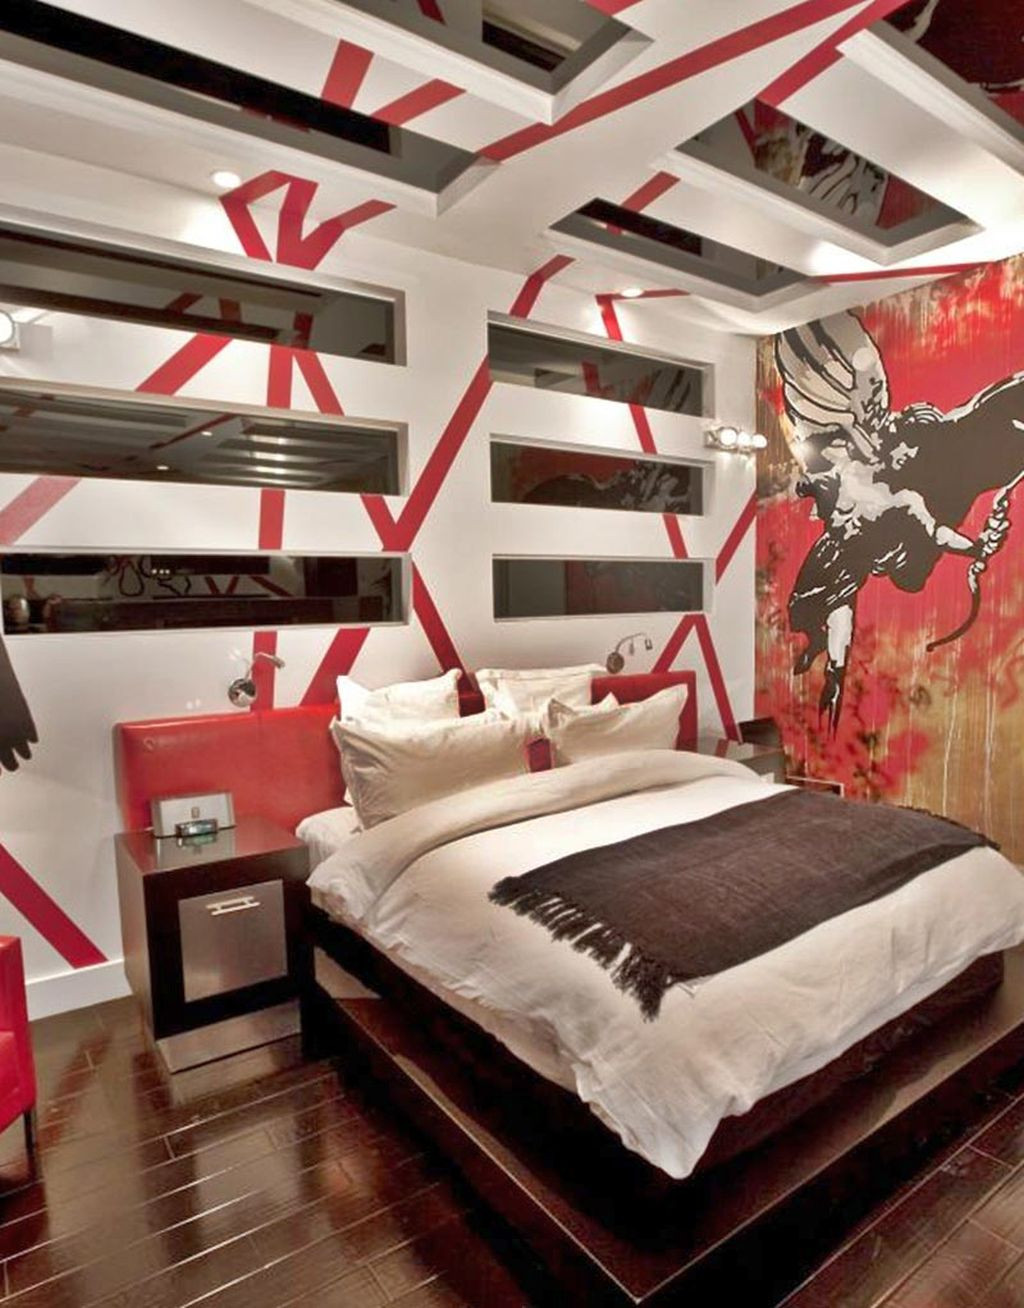 Cool Paint Ideas For Bedroom
 19 Cool Painting Ideas for Bedrooms You ll Love for Sure